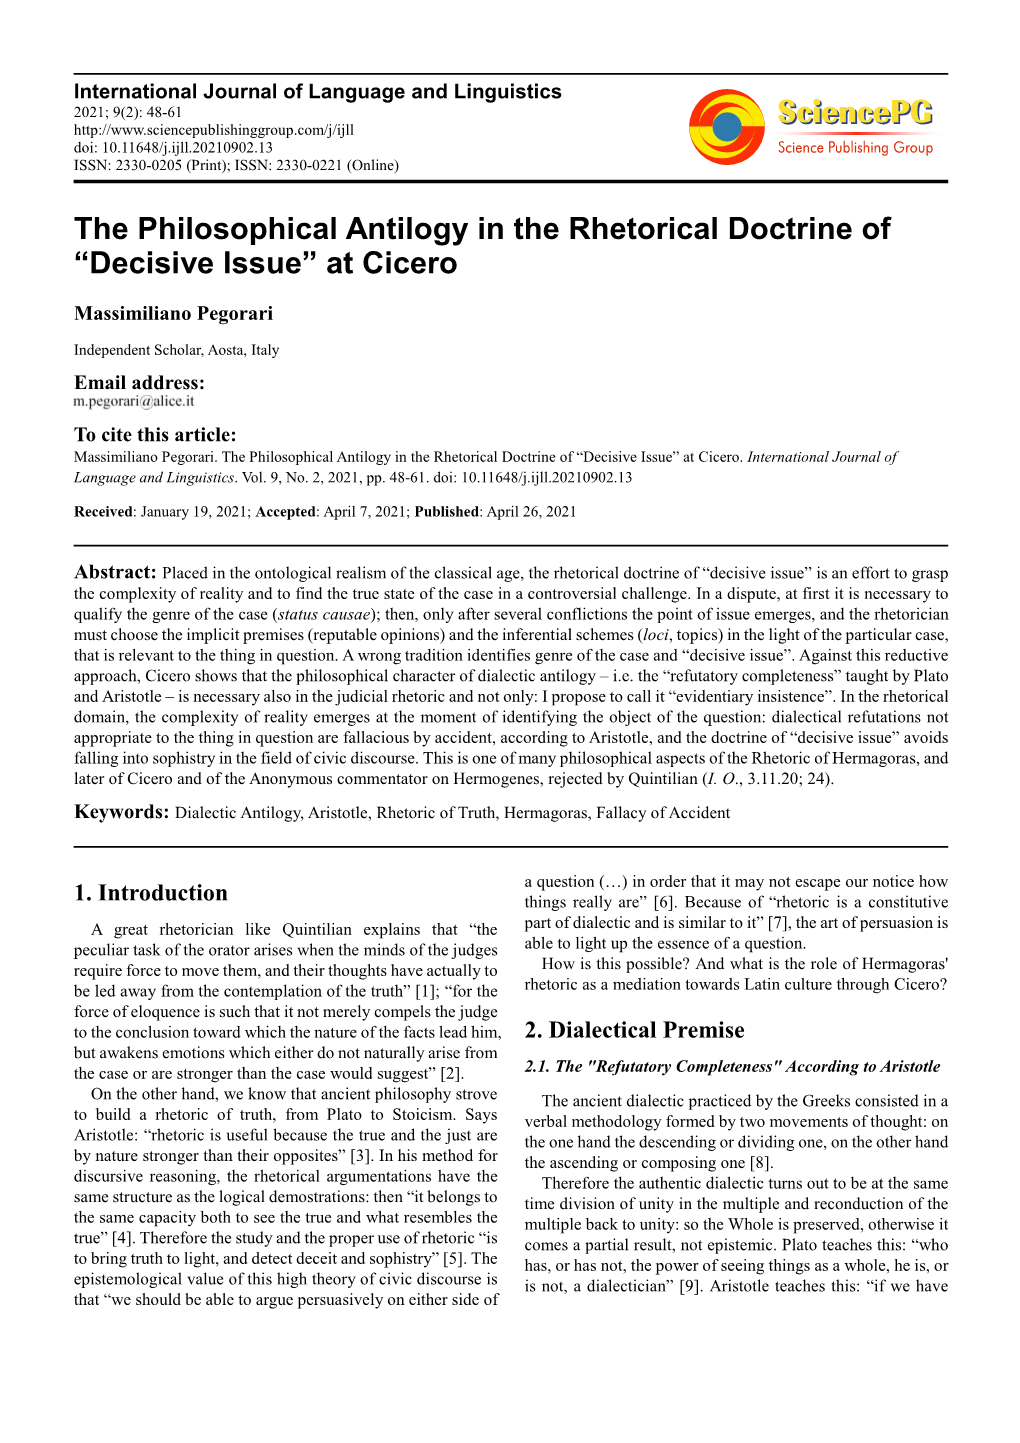 The Philosophical Antilogy in the Rhetorical Doctrine of “Decisive Issue” at Cicero